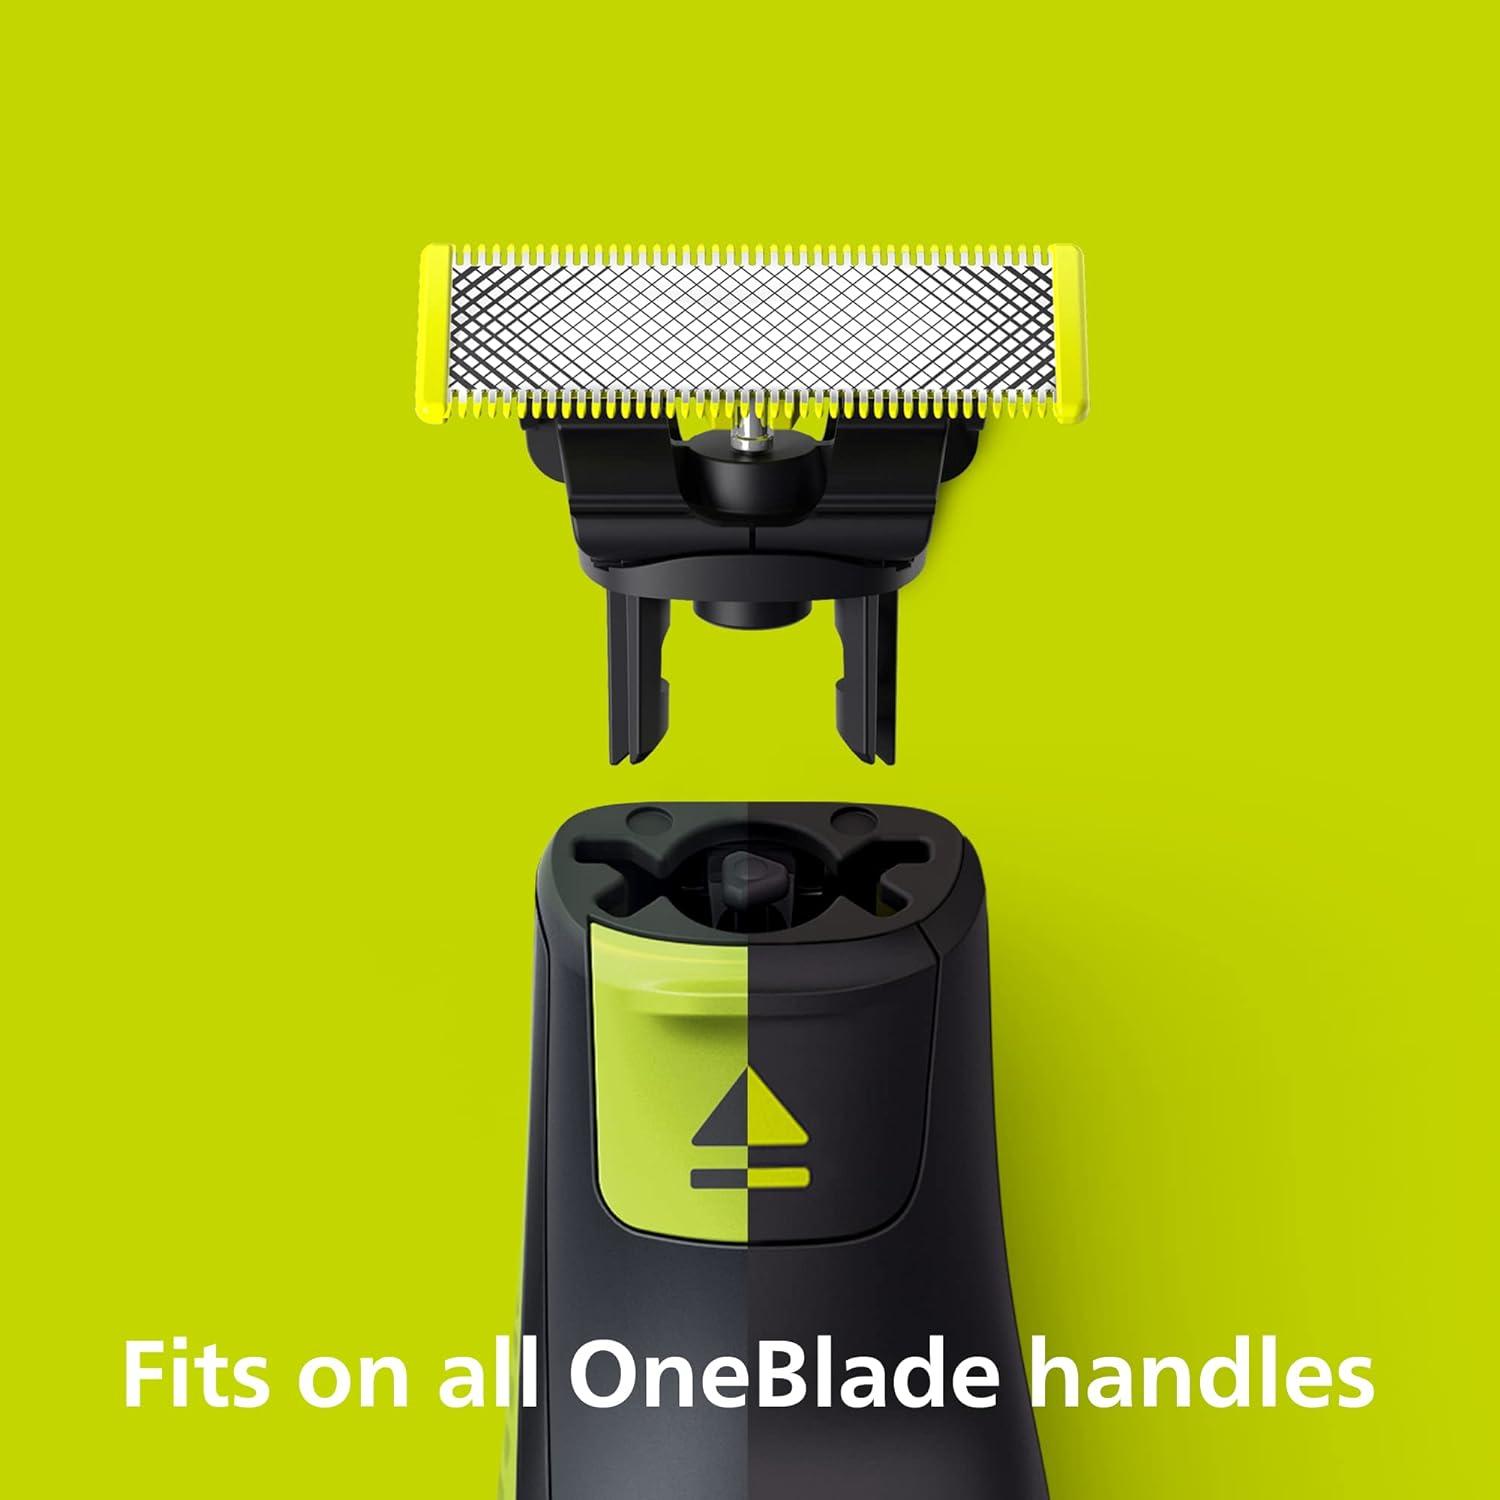 Philips OneBlade 2 stainless steel Replacement Blades for Face, compatible  with all OneBlade beard trimmers, body groomers, electric razors (Model